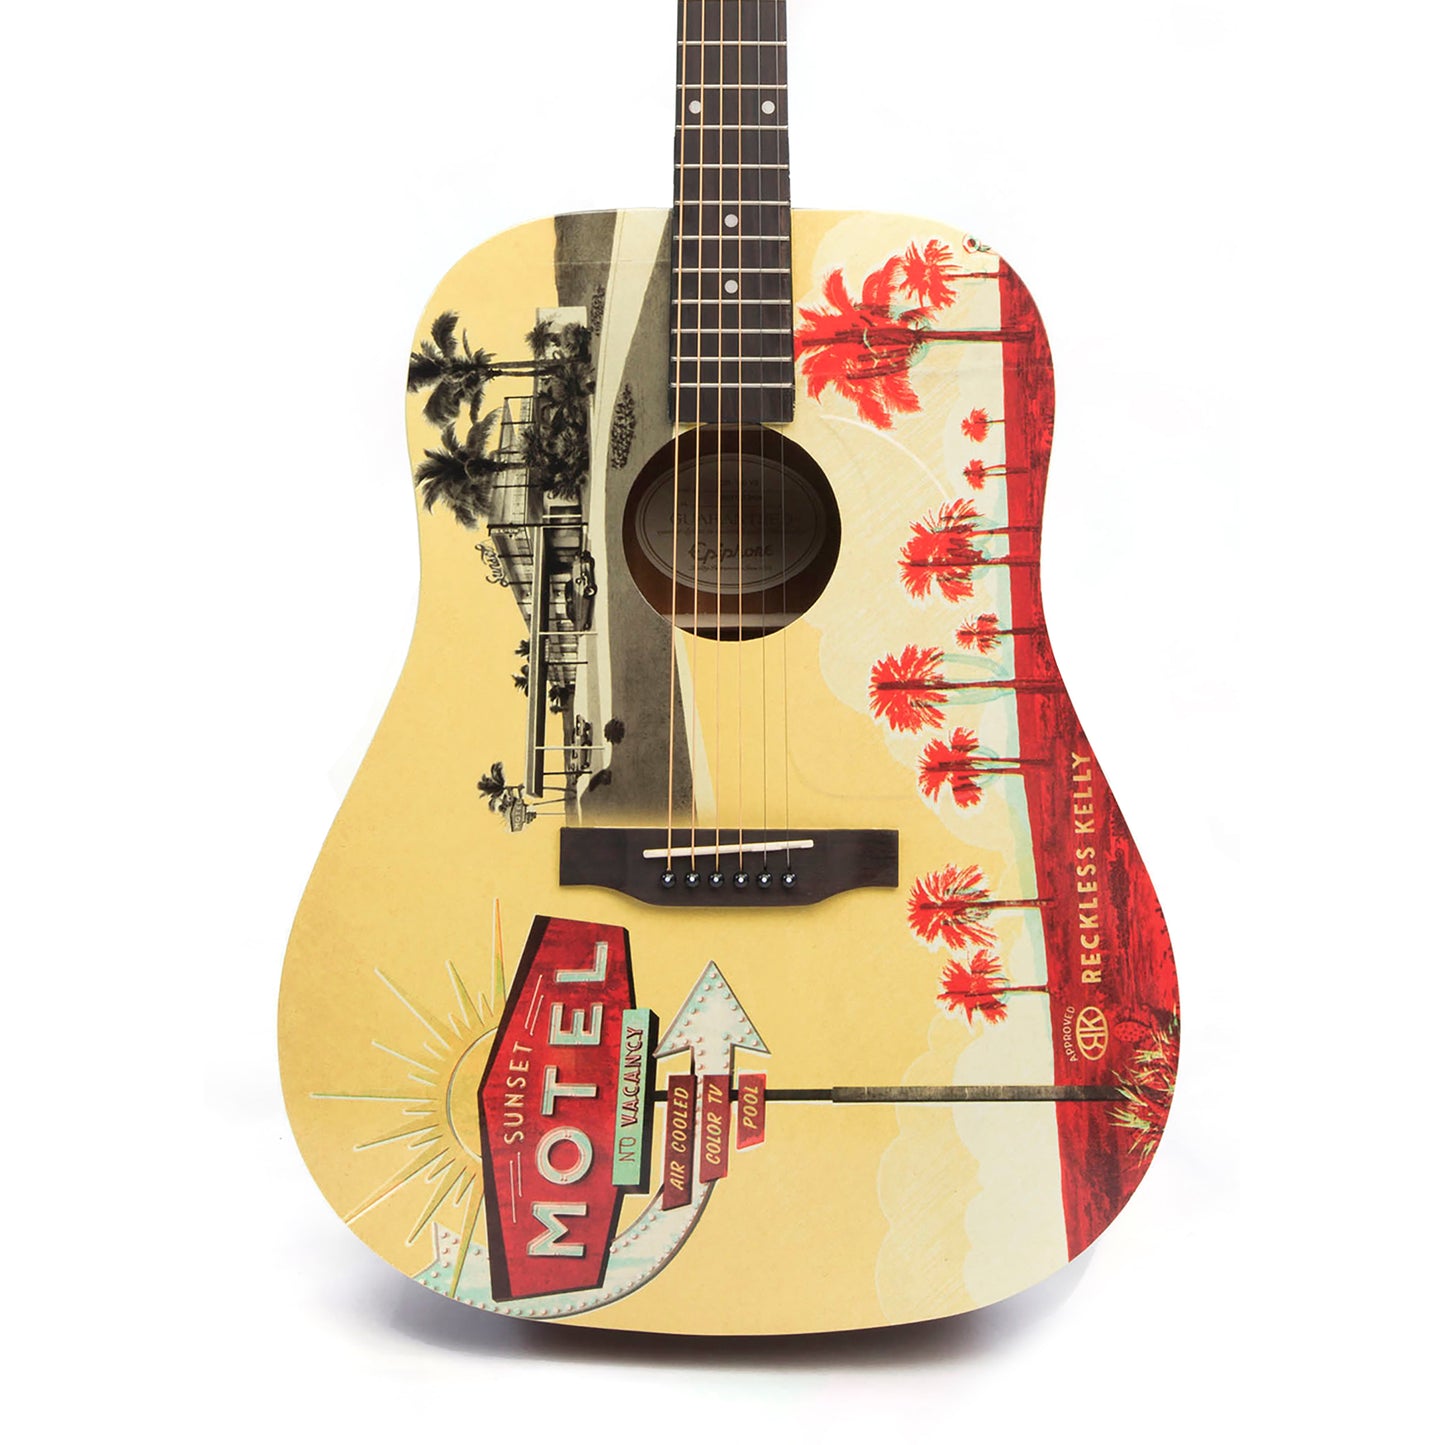 Sunset Motel Guitar - AUTOGRAPHED BY RECKLESS KELLY